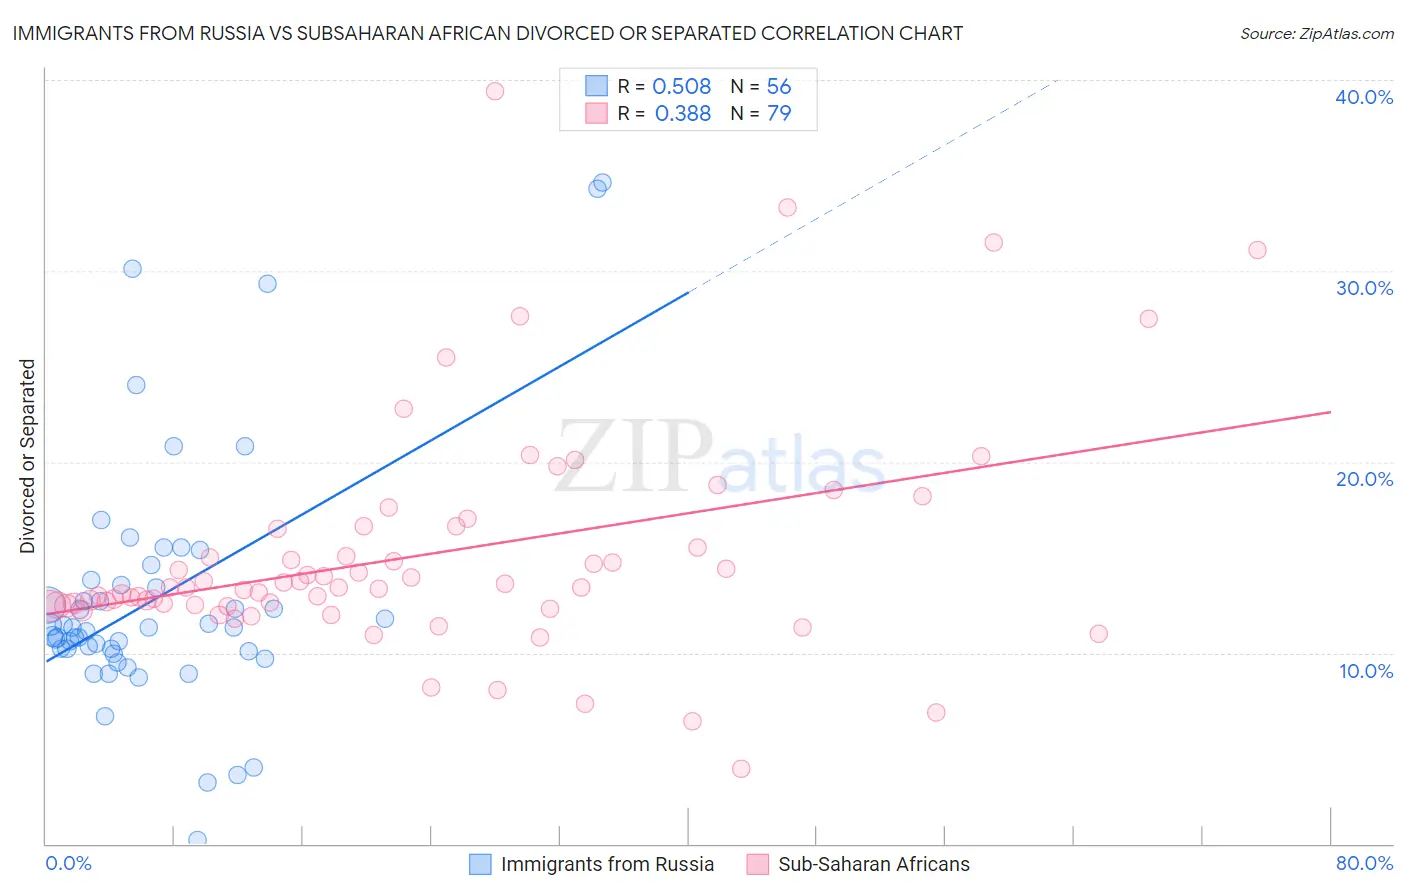 Immigrants from Russia vs Subsaharan African Divorced or Separated